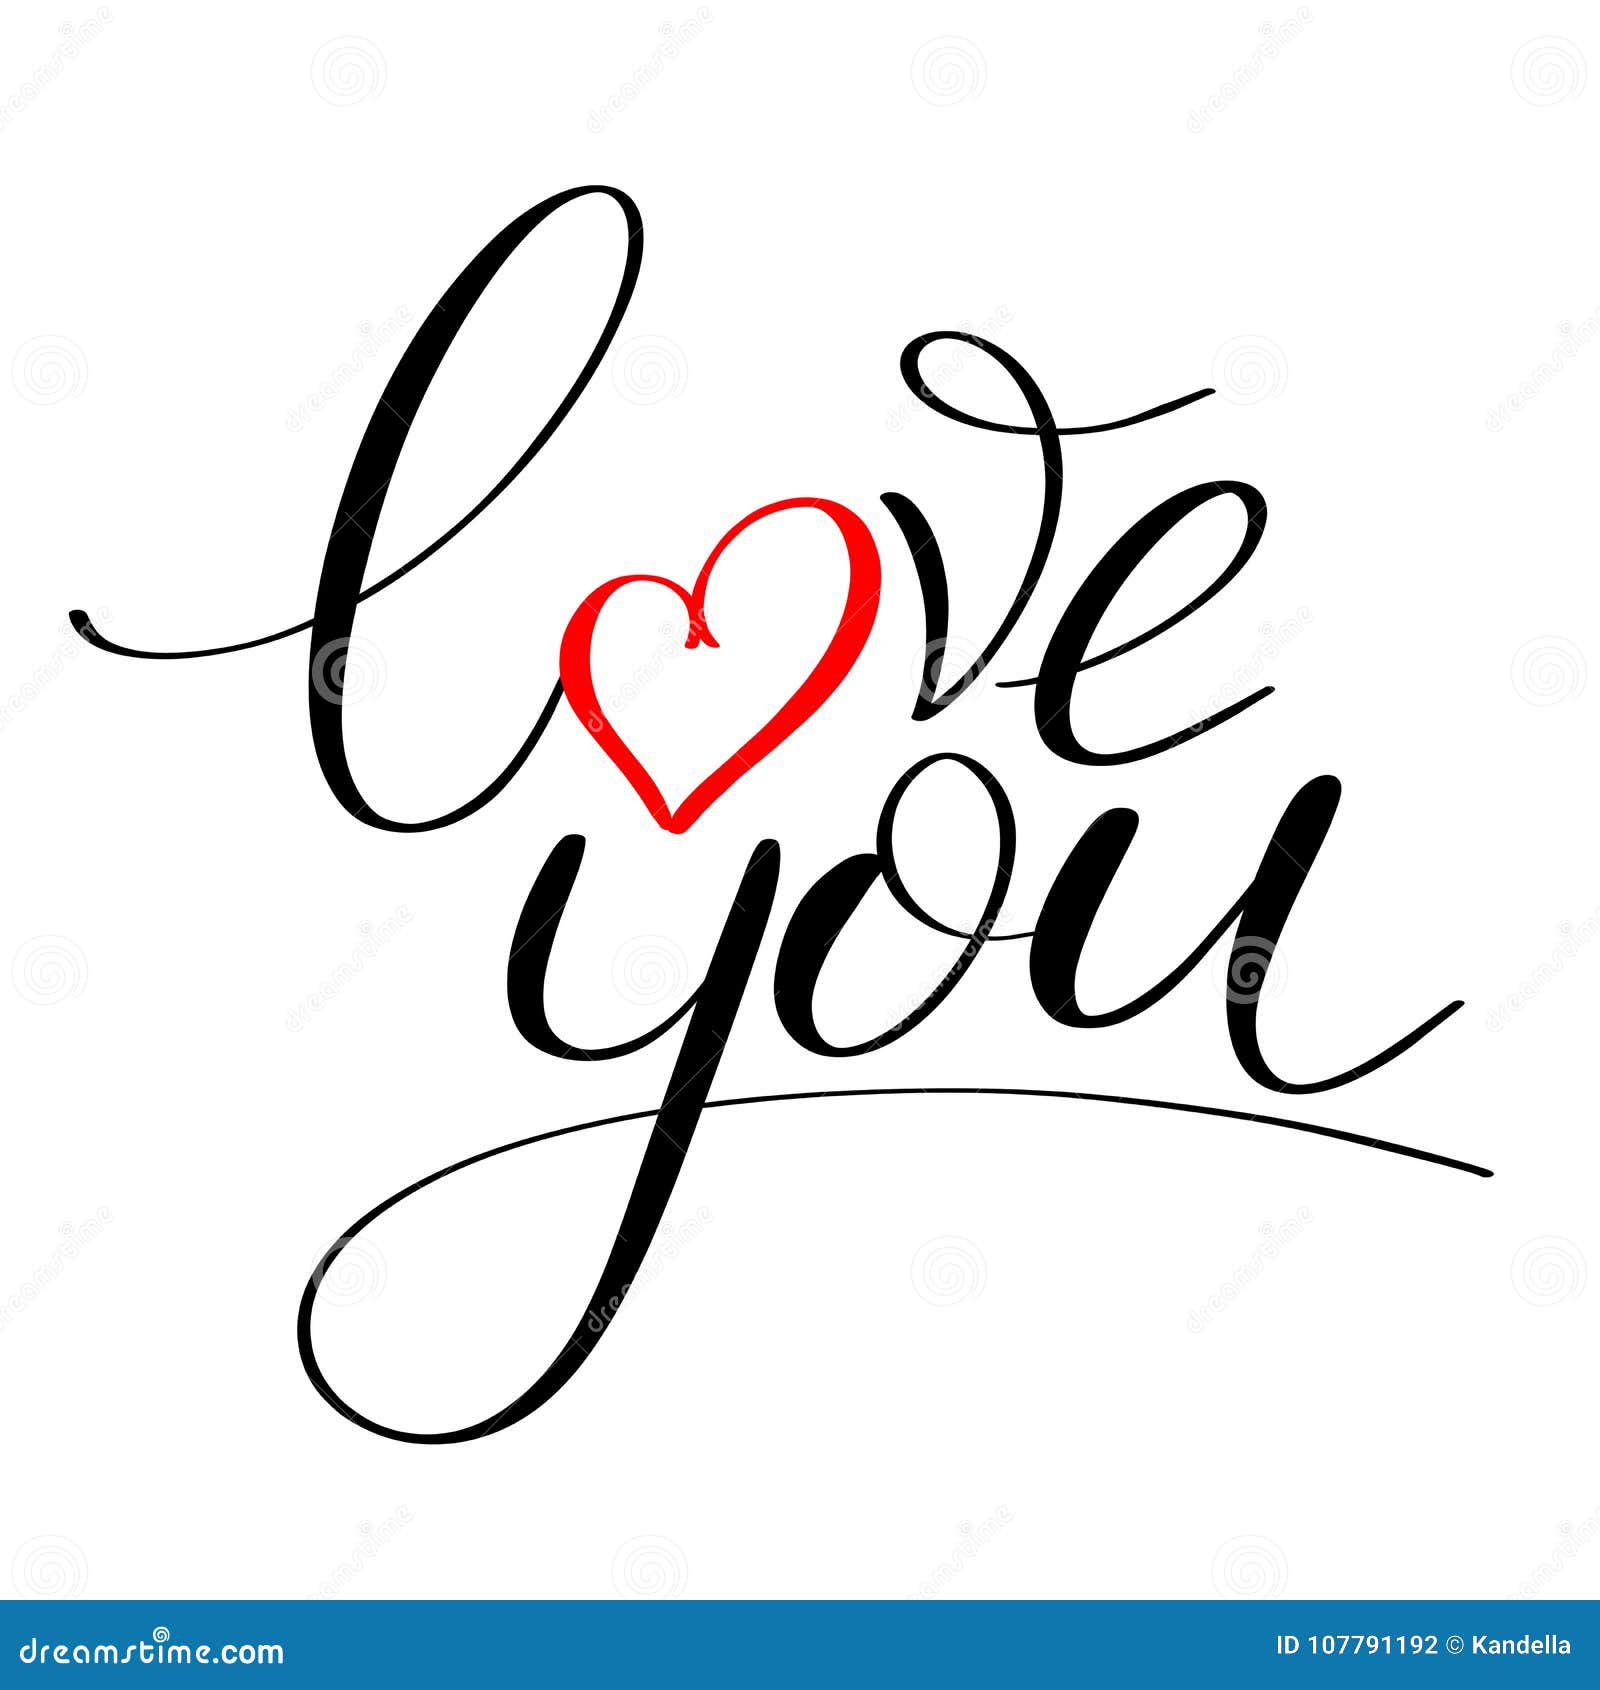 Love you with heart text stock vector. Illustration of banner - 107791192